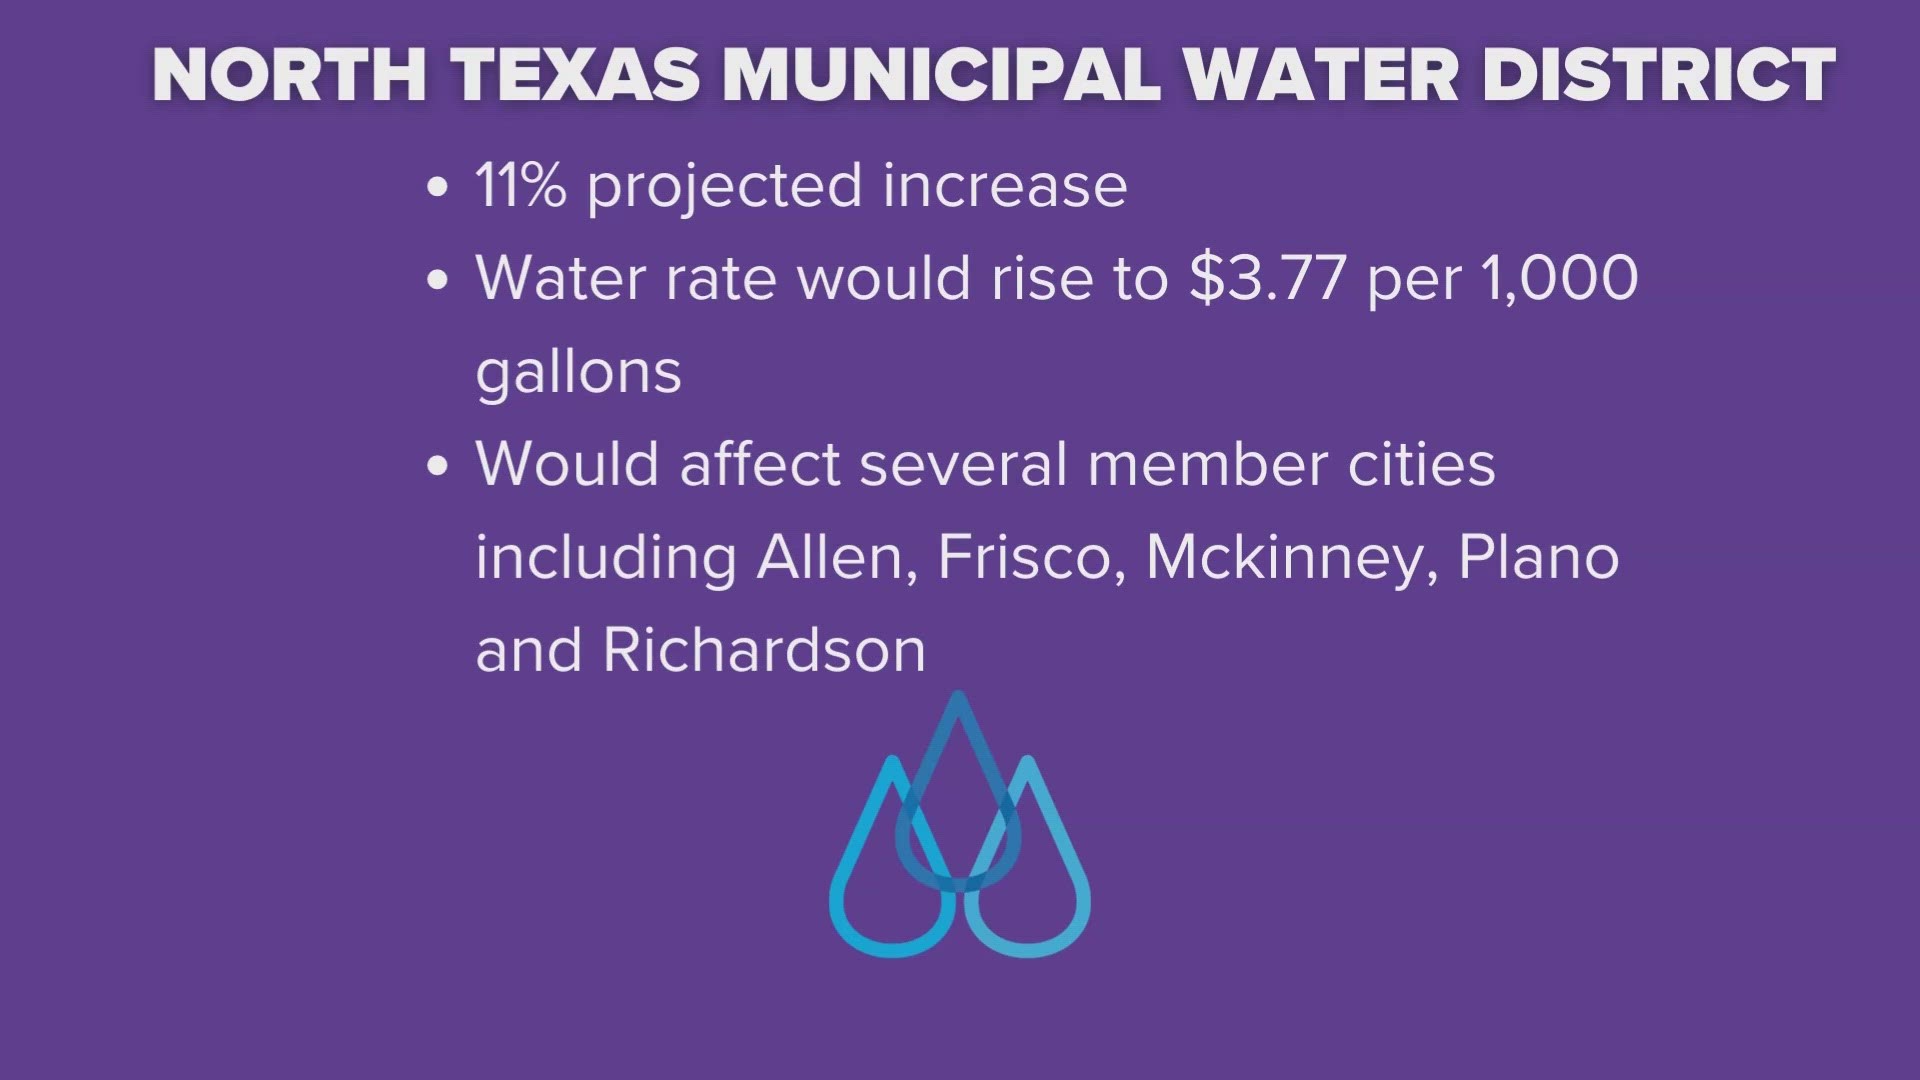 The North Texas Municipal Water District could raise the price of water to $3.77 per 1,000 gallons.